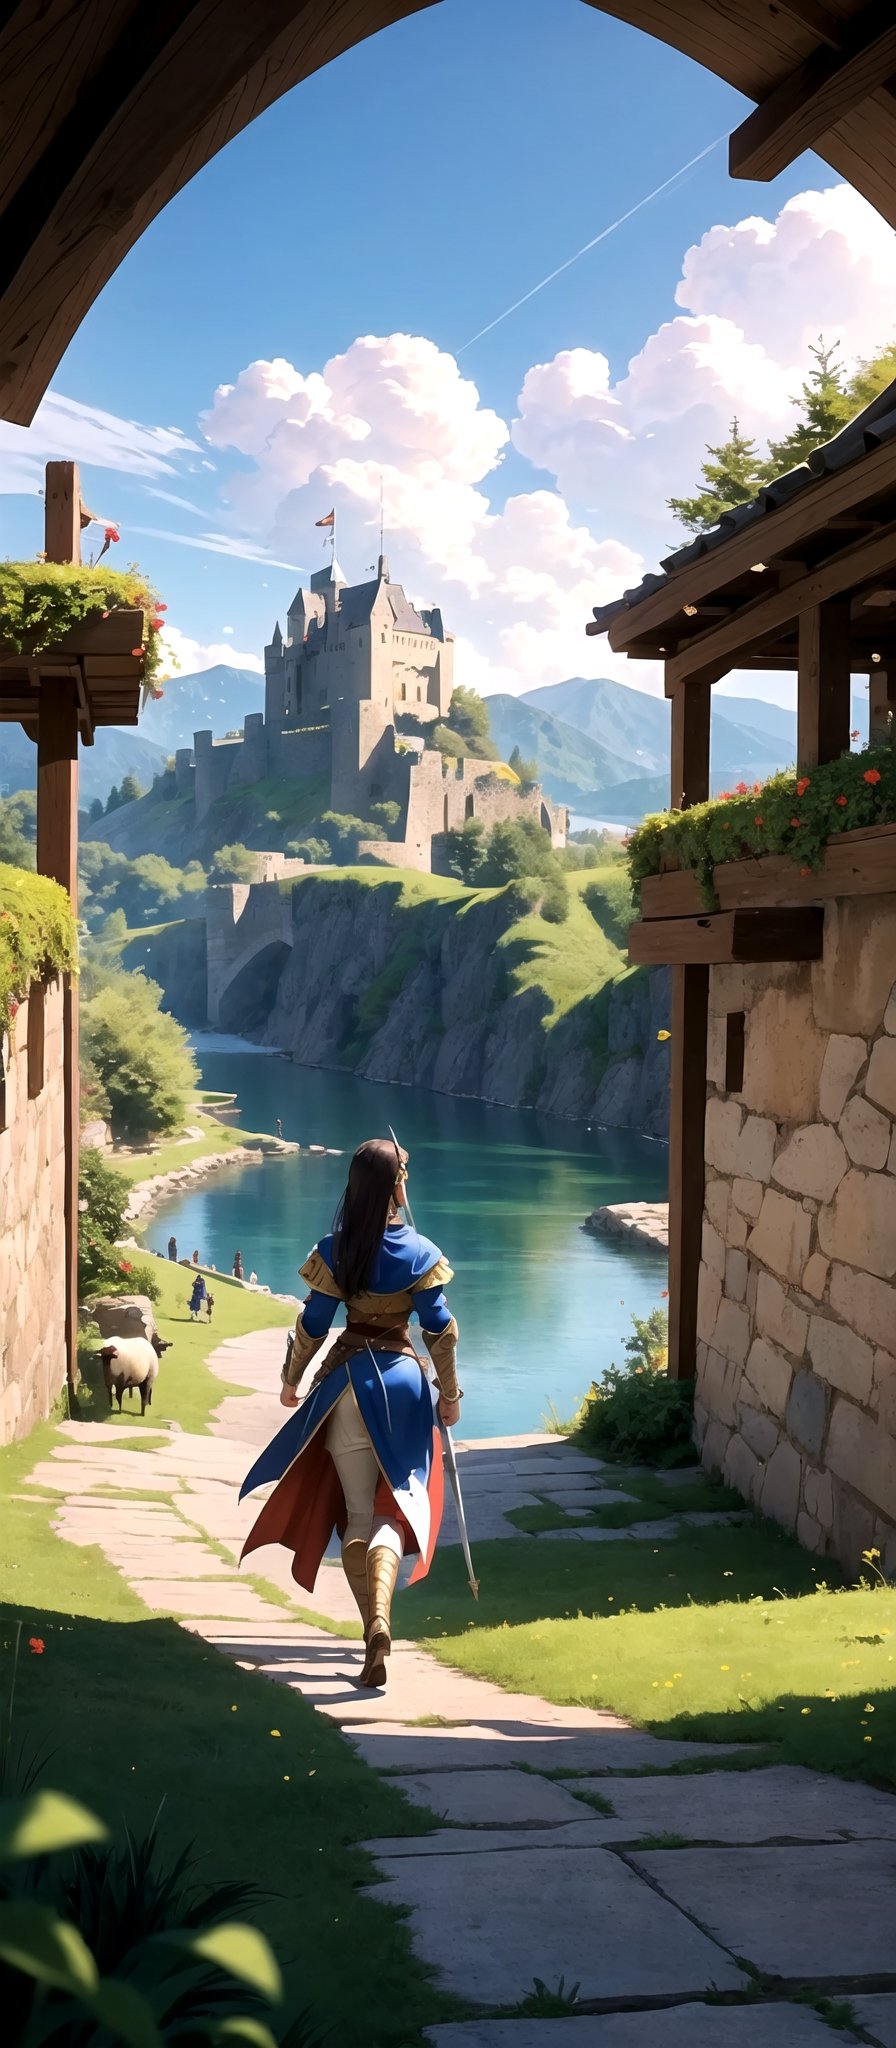 "Capture the essence of epic clashes and scenic beauty with this battle wallpaper, (((Picture a beautiful oung female warrior walking through a medieval battleground))). In the background, a majestic stone castle overlooks a tranquil lake, while sheep graze peacefully in a lush garden. Towering mountains frame the horizon under a picturesque sky. This scene, inspired by Age of Empires, combines the thrill of speed with the grandeur of medieval times, creating a truly captivating wallpaper for your phone."
 